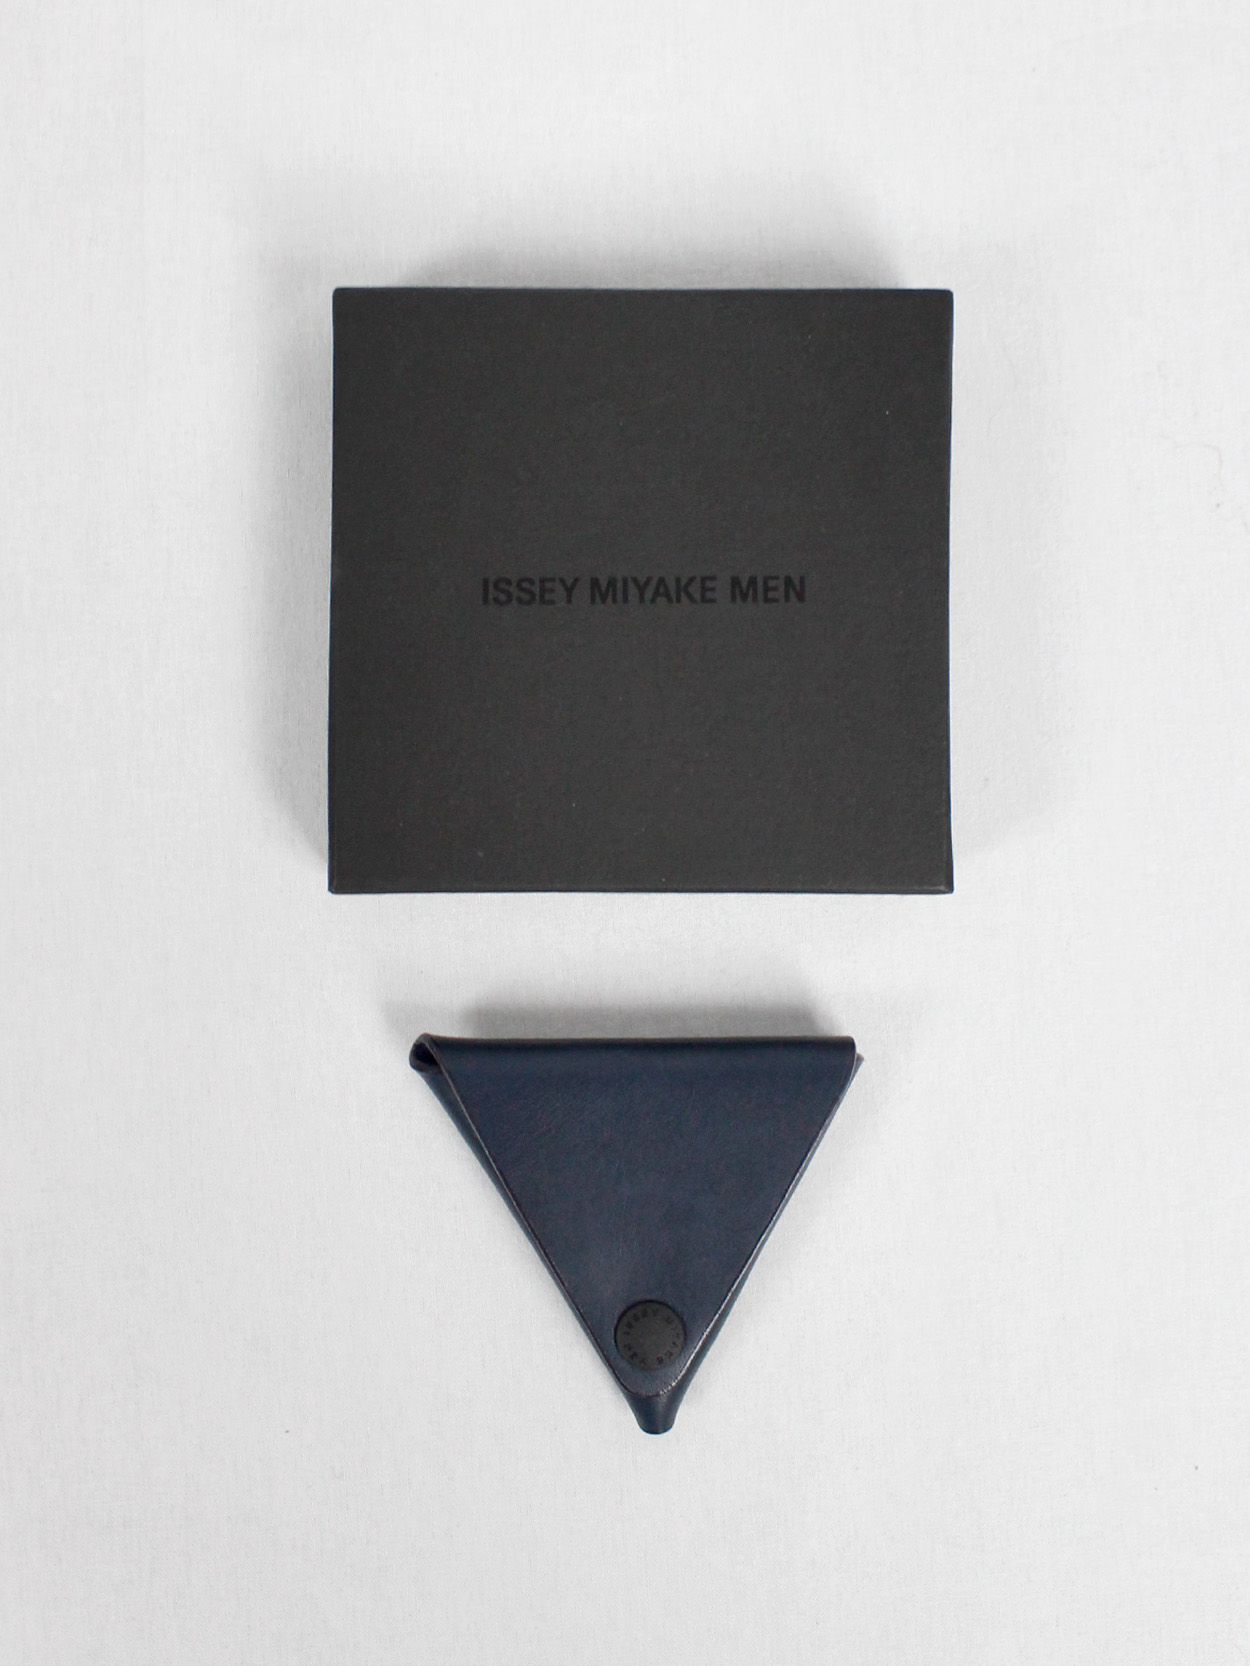 Issey Miyake Men navy triangular origami coin pouch - V A N II T A S